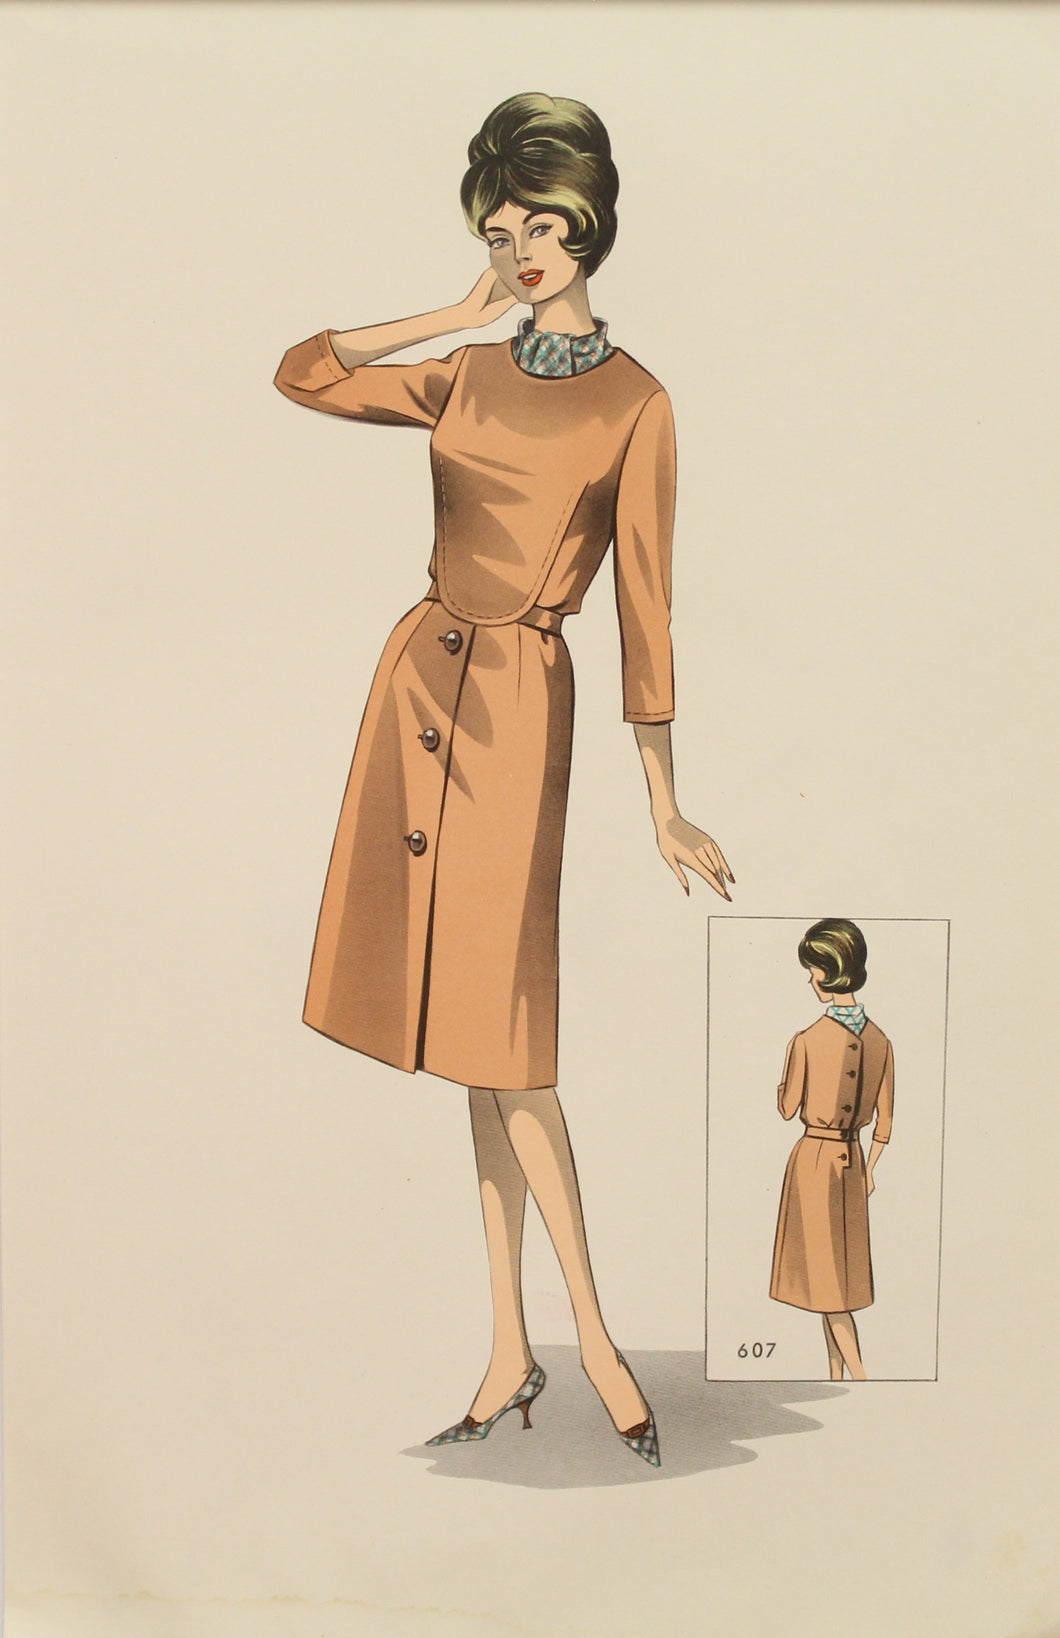 Fashion of the 60s, New Lines from the Fashions in Vienna, Mode Studio, 607, 1965